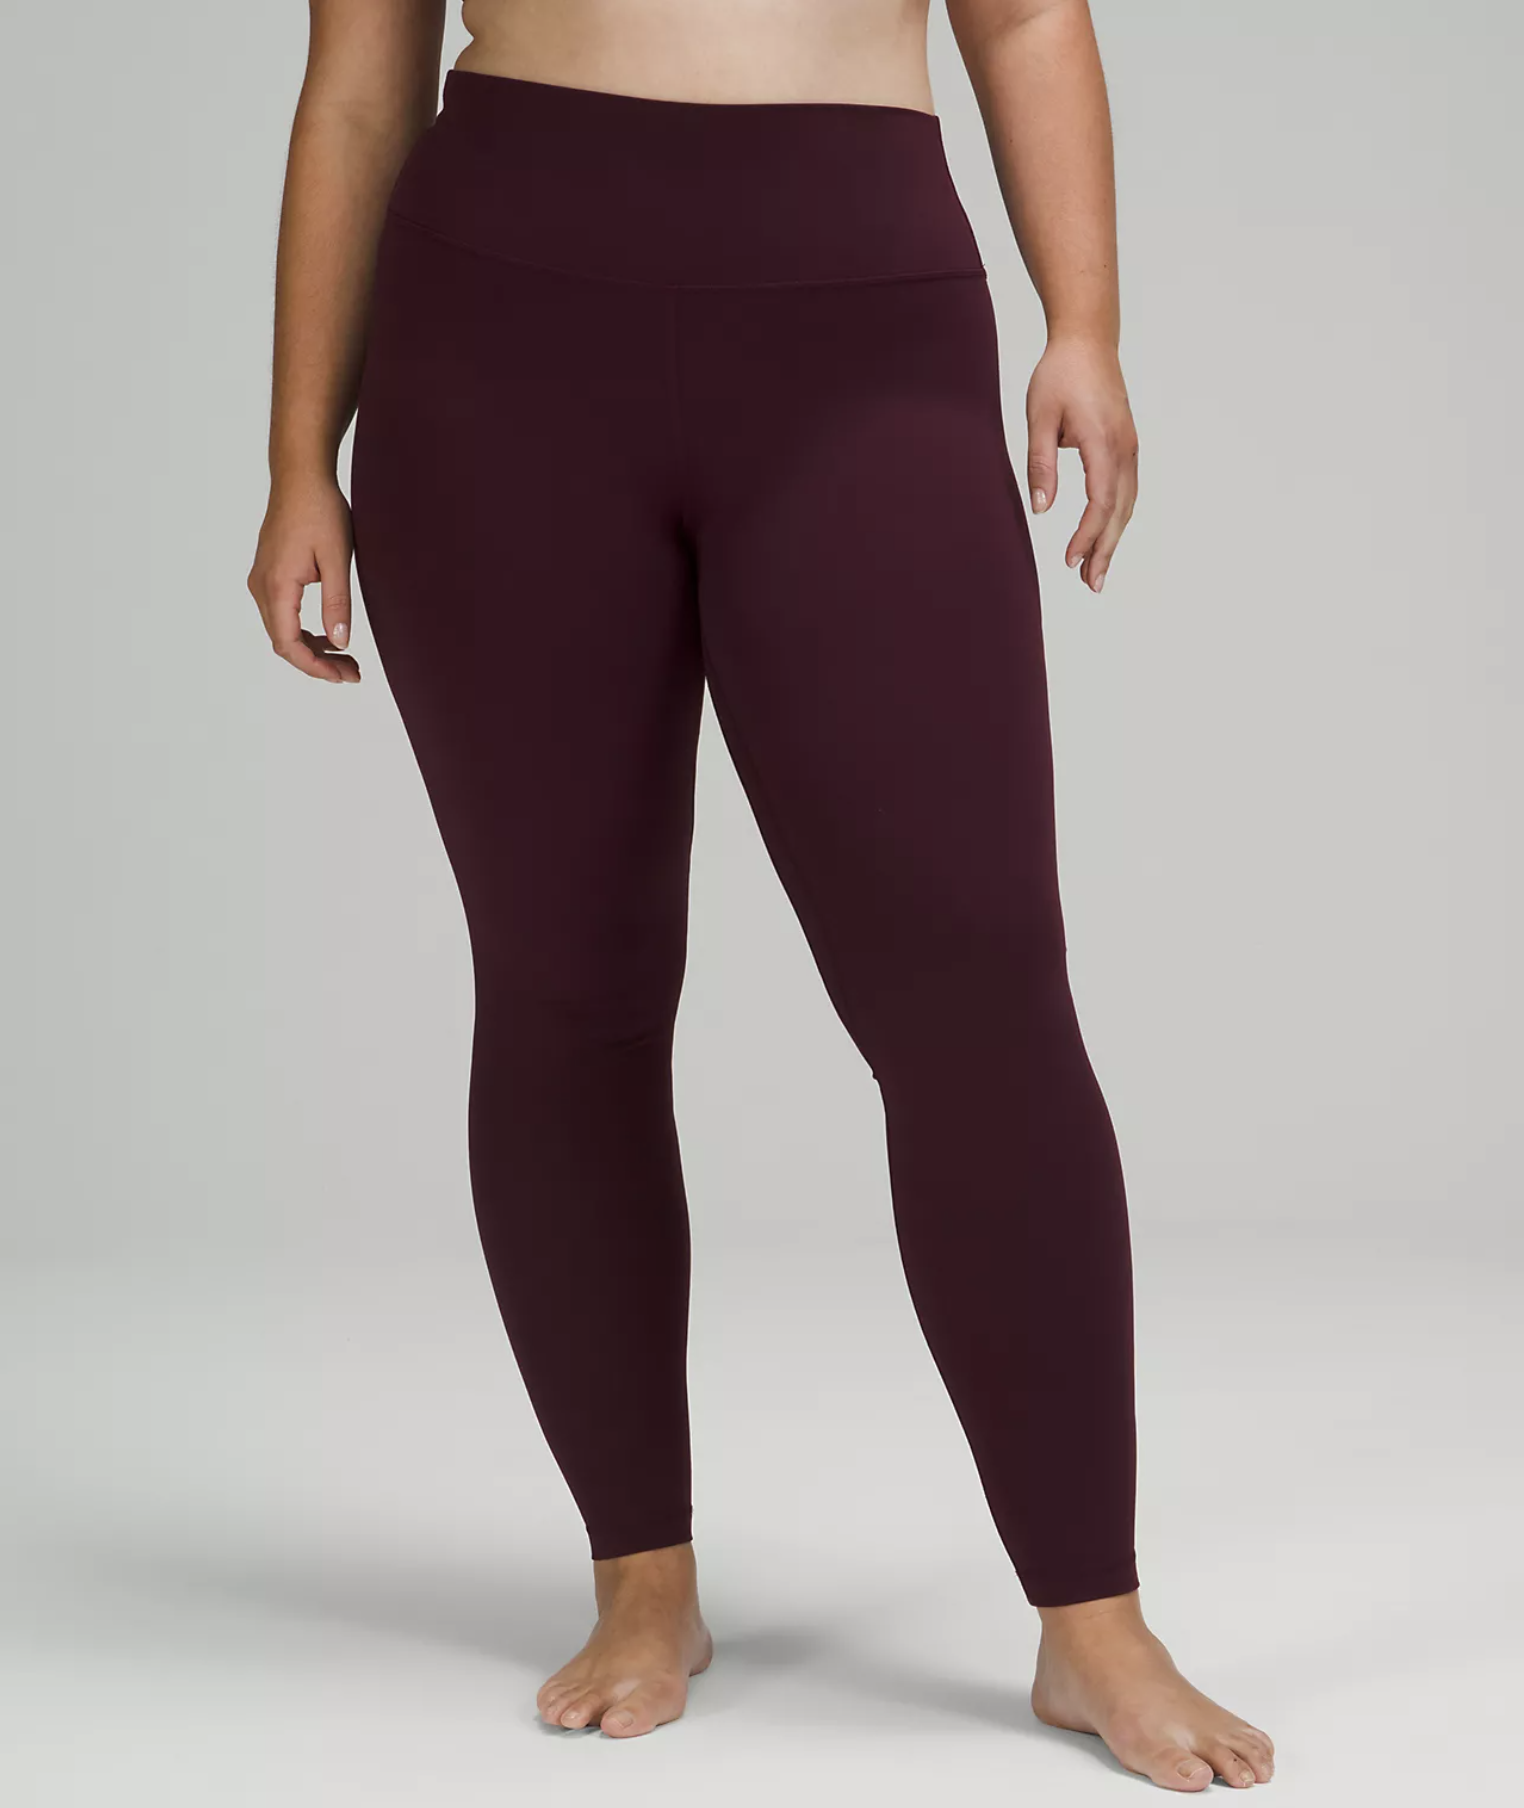 17 Best Leggings Brands – Where to Buy Leggings & Workout Tights